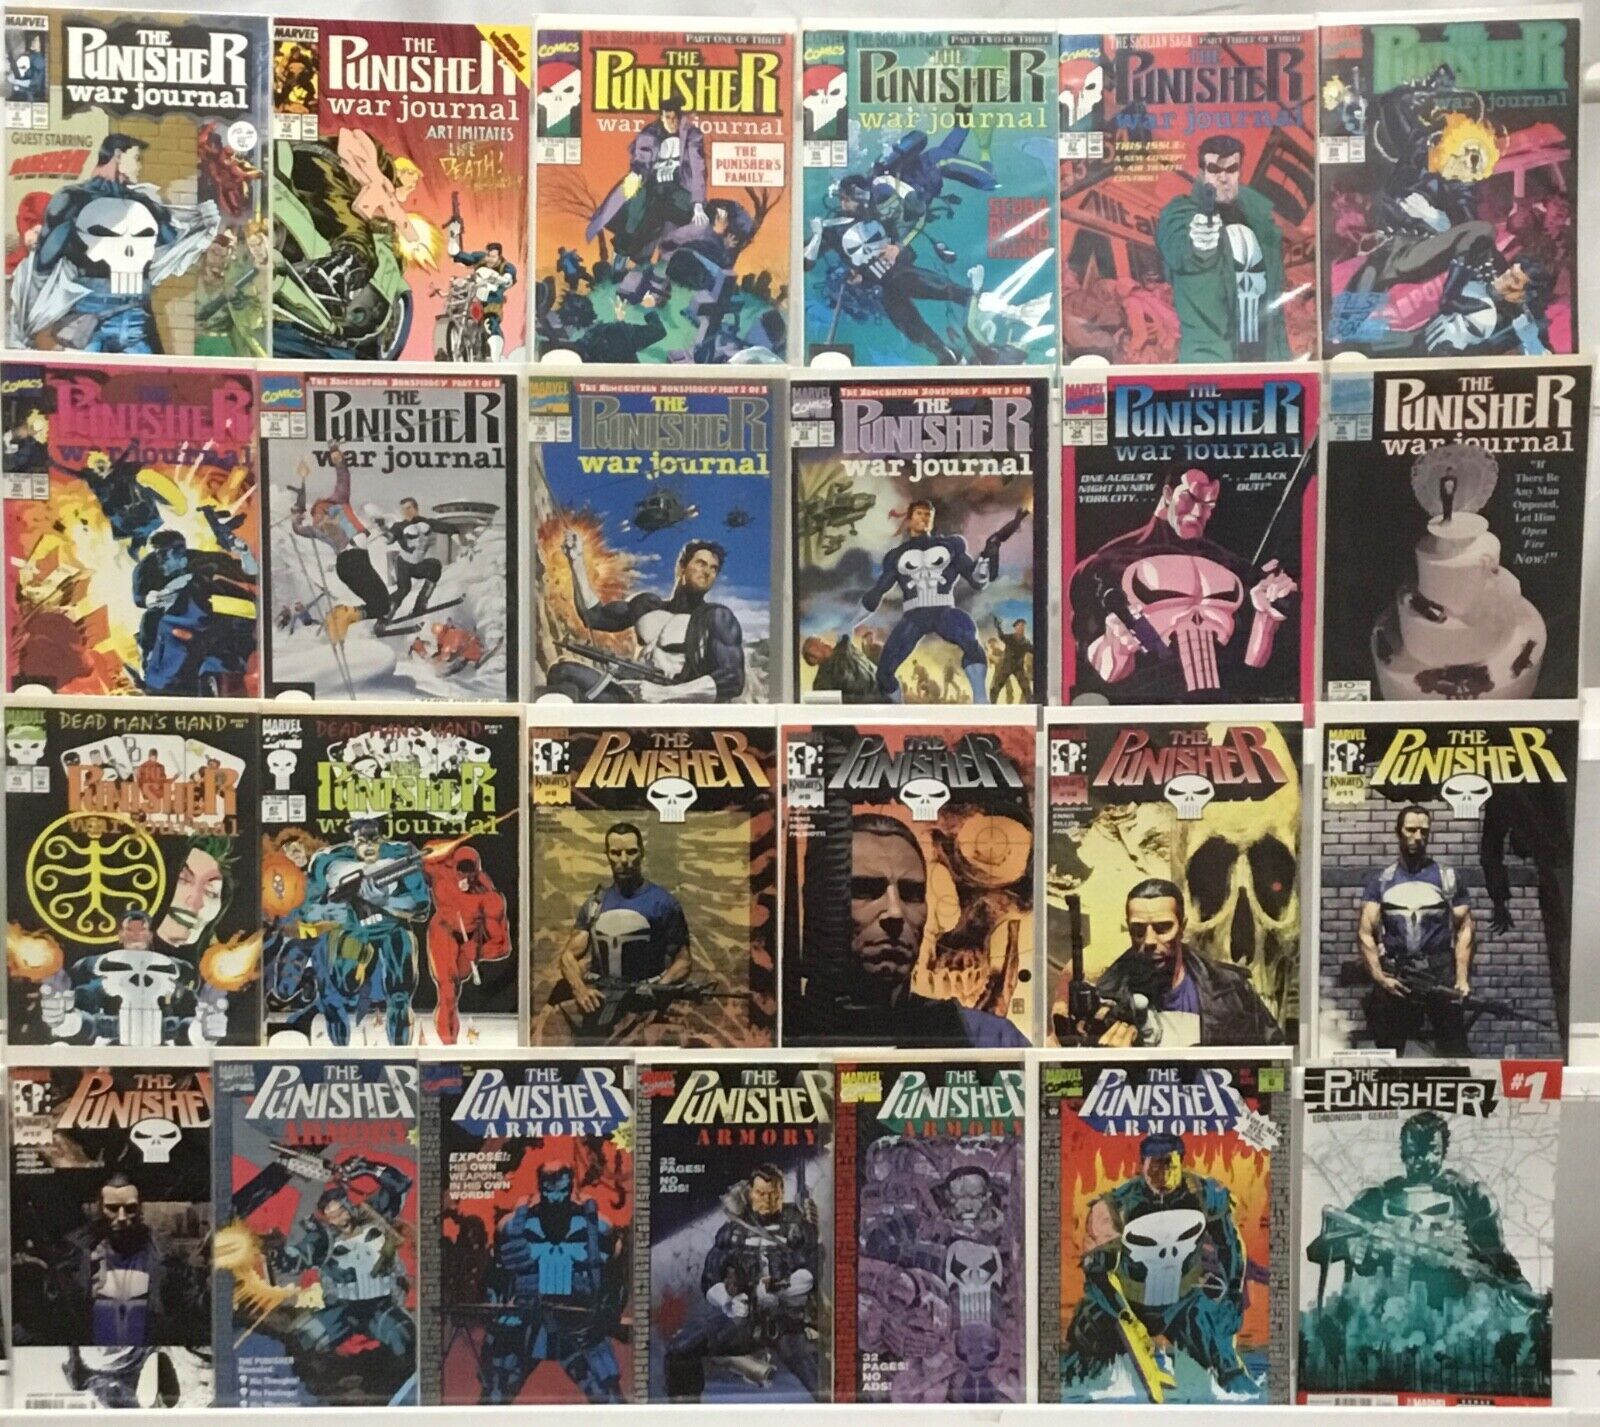 Marvel Comics Punisher Comic Book Lot of 25 Issues War Journal, Knights, Armory